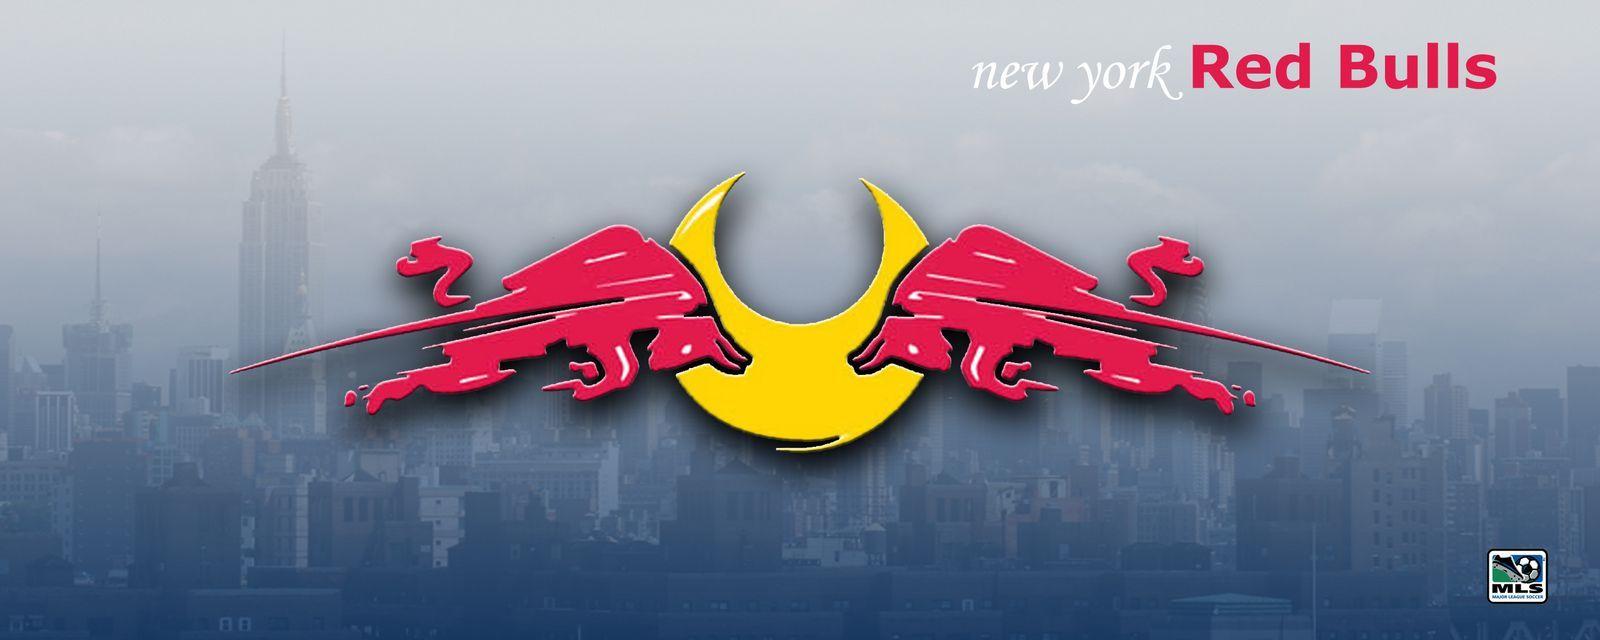 image about Red Bull Logos, Monster energy 800×859 Red